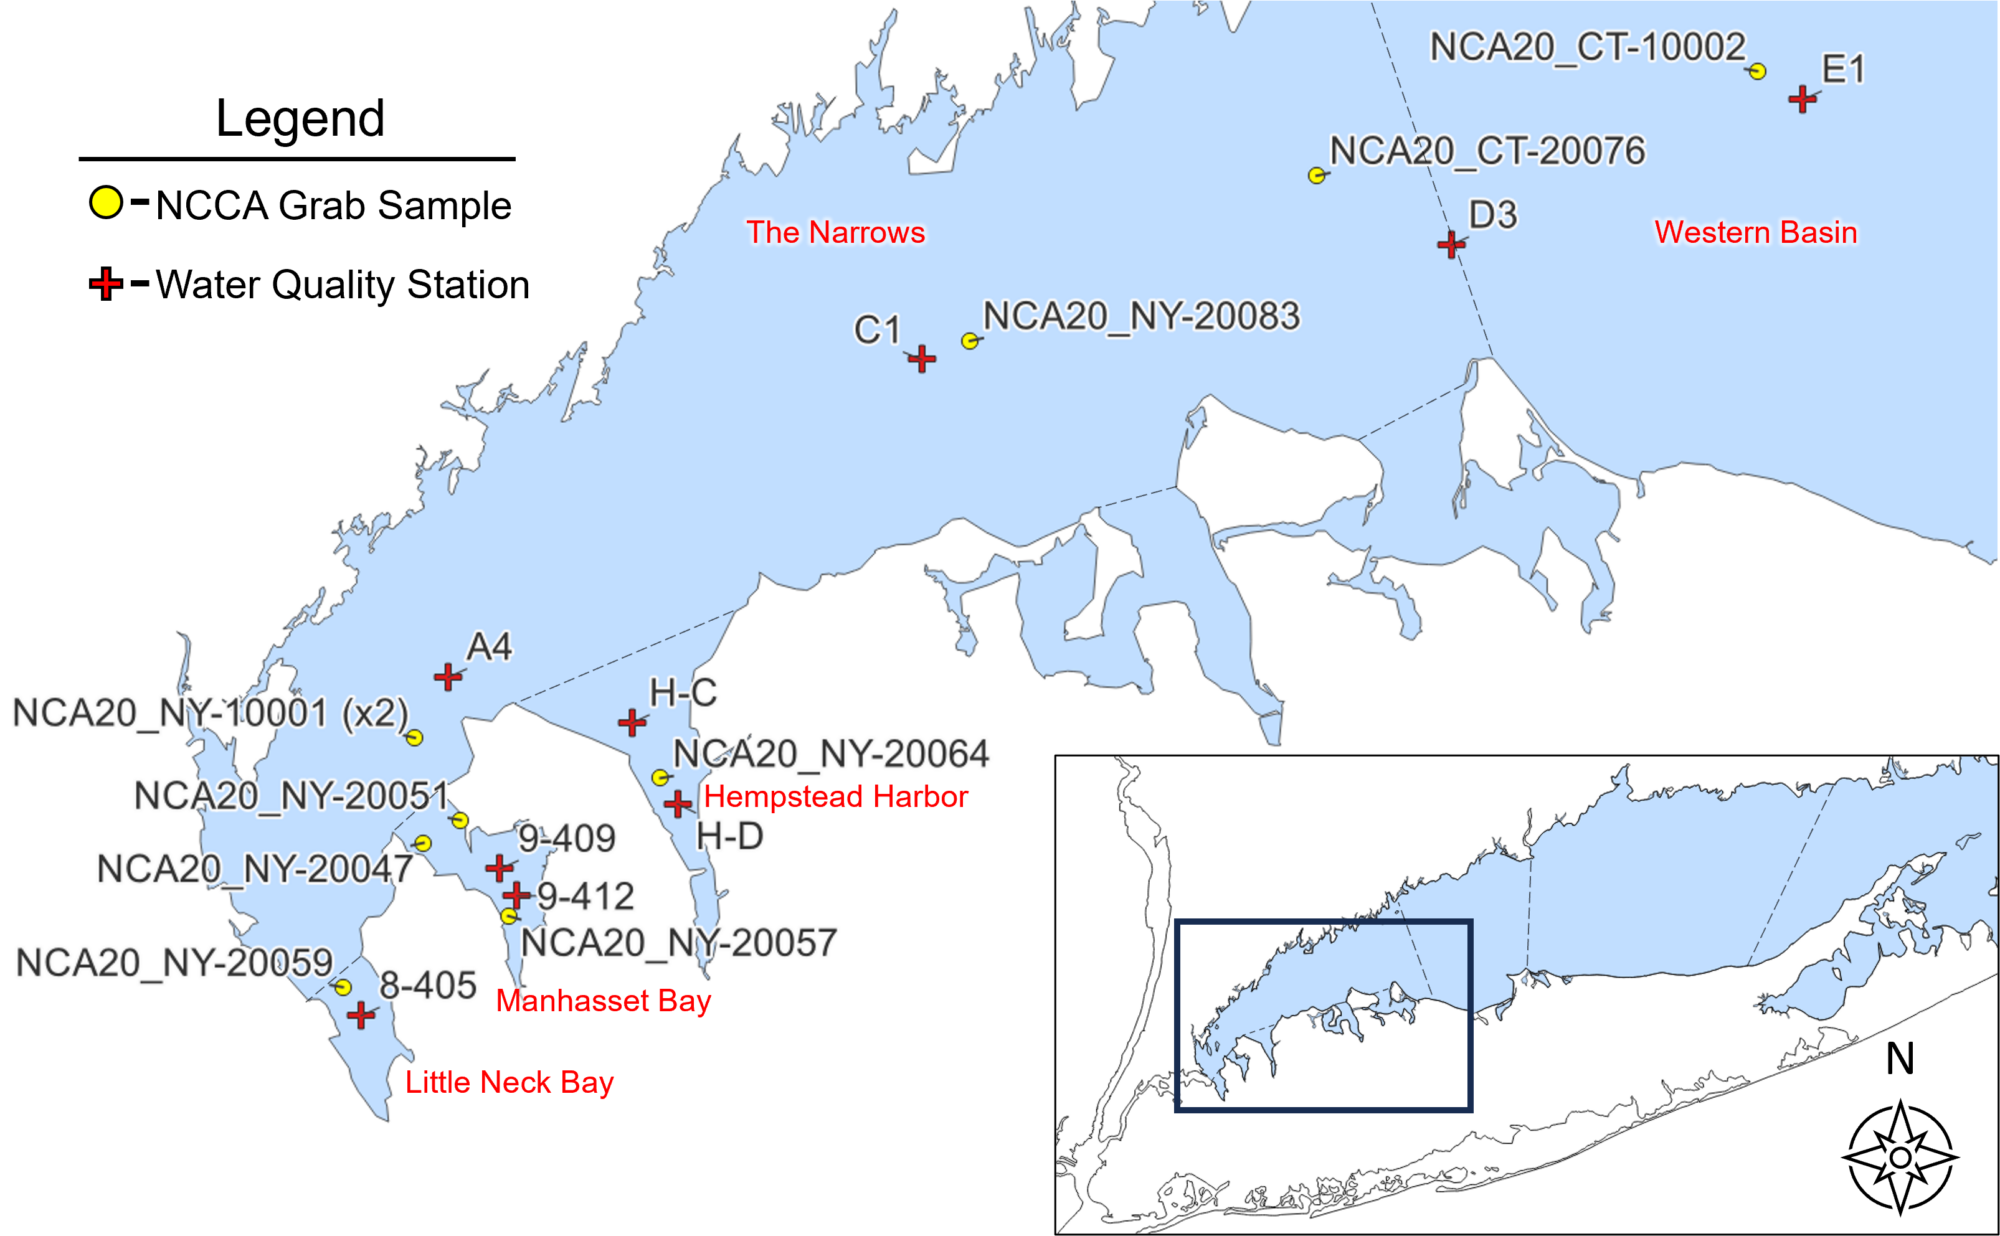 The map shows the 10 NCCA sampling sites Dietl's research team is studying. They are all located near water quality monitoring stations. Image courtesy of Dietl.